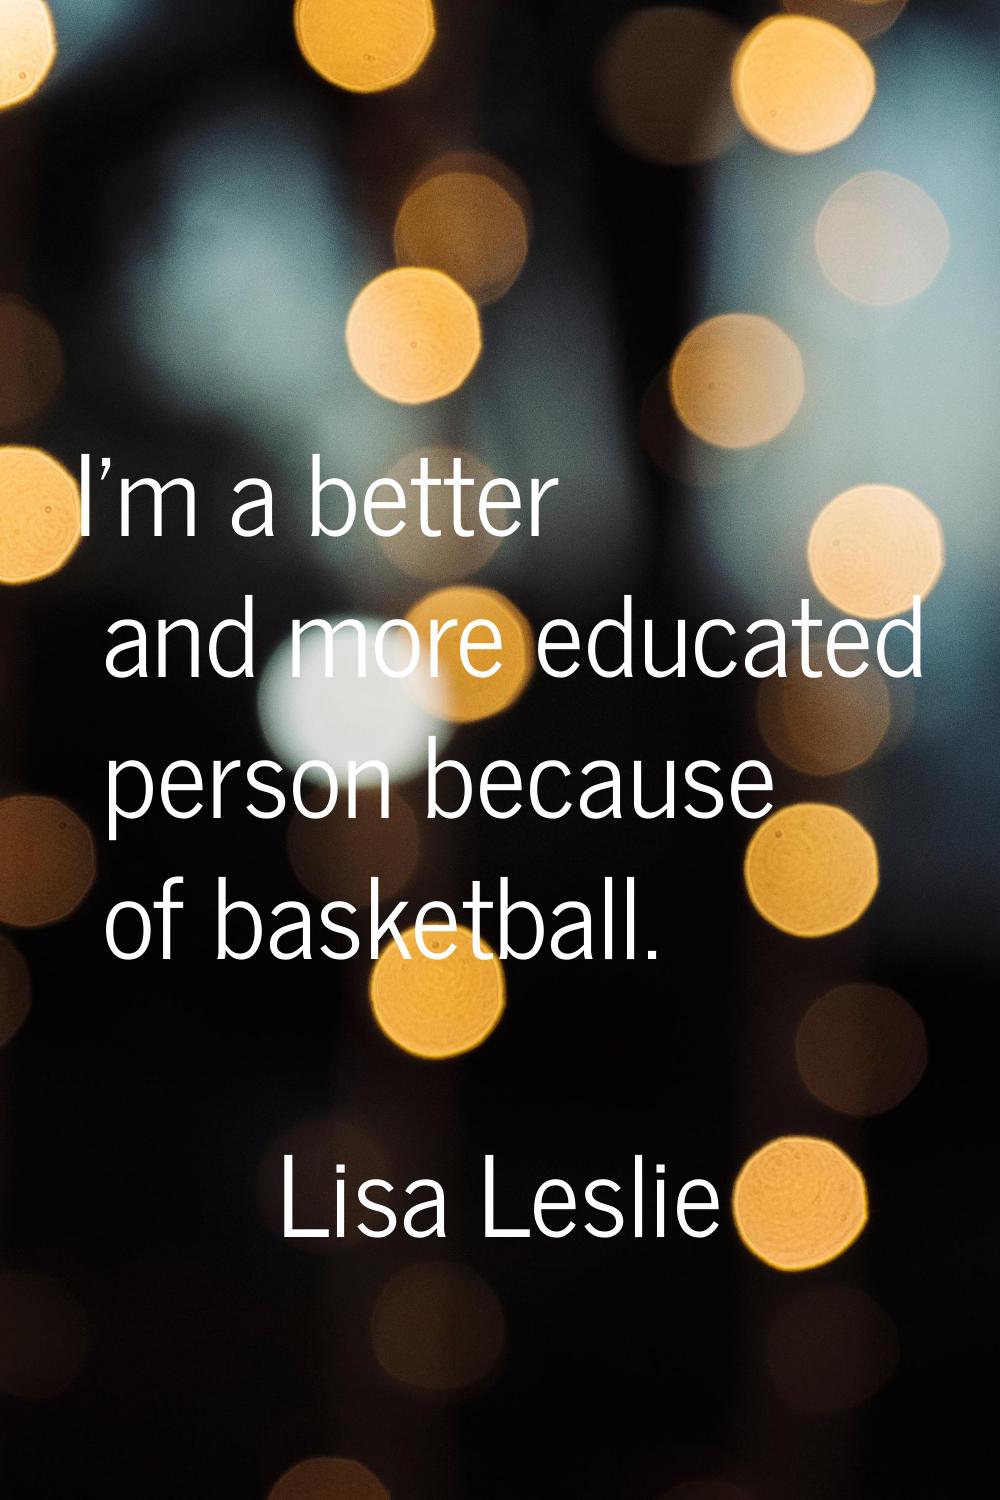 I'm a better and more educated person because of basketball.